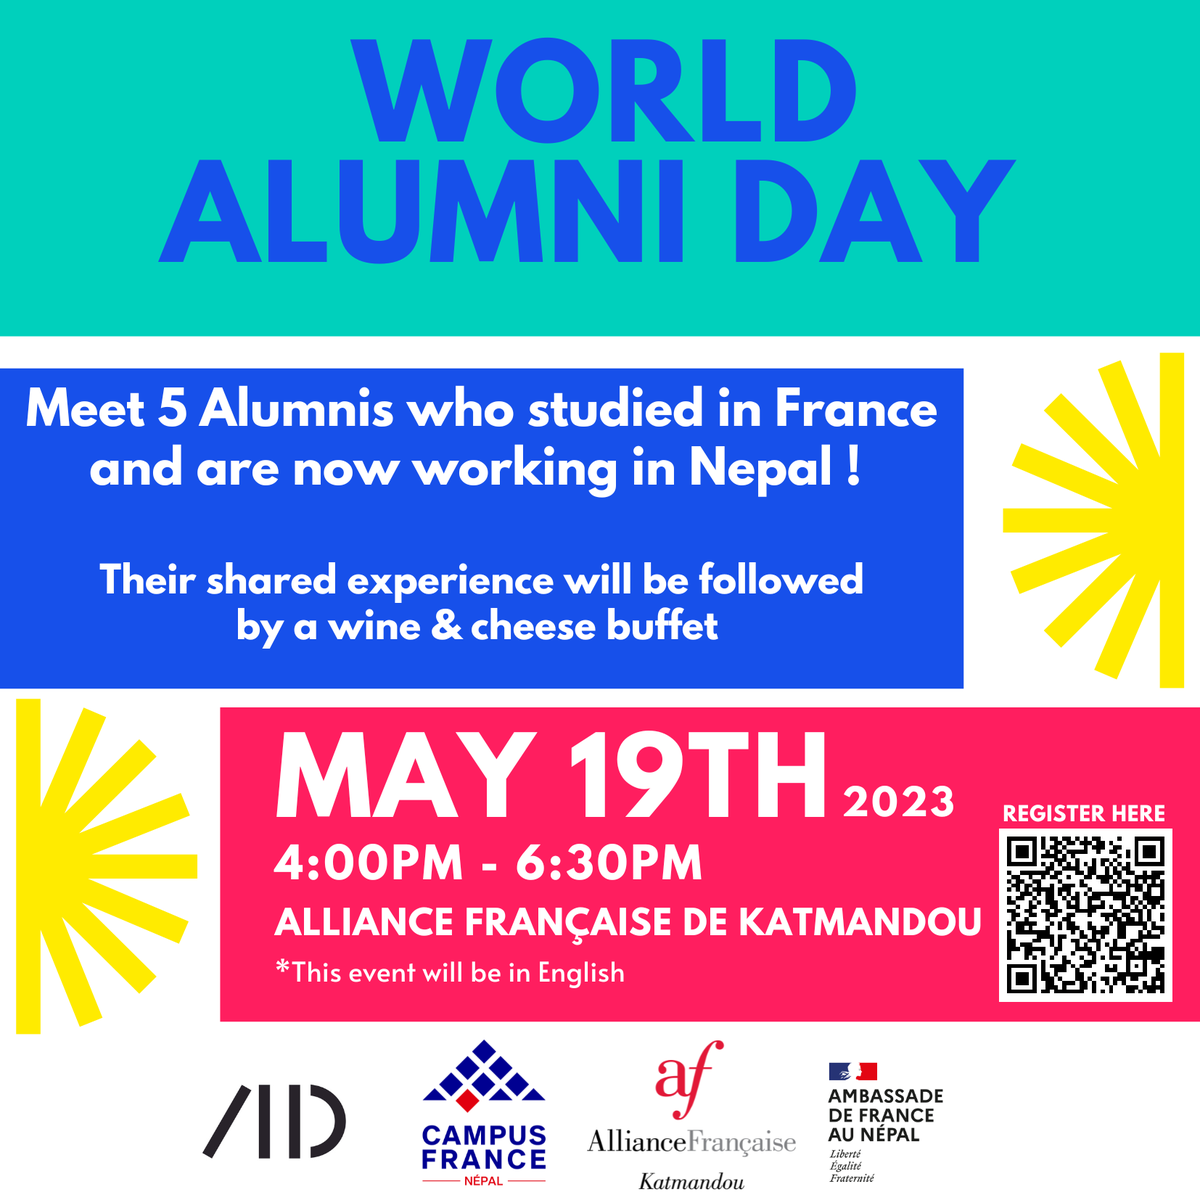 𝗙𝗿𝗮𝗻𝗰𝗲 𝗔𝗹𝘂𝗺𝗻𝗶 𝗗𝗮𝘆 🇳🇵
Let's celebrate the international student experience in 🇨🇵 !

Meet 5 Alumnis who studied in 🇨🇵 and are now working in Nepal !

✨ May 19th - Alliance française de  Katmandou
 
#FranceAlumniDay
Confirm your presence : docs.google.com/forms/d/e/1FAI…